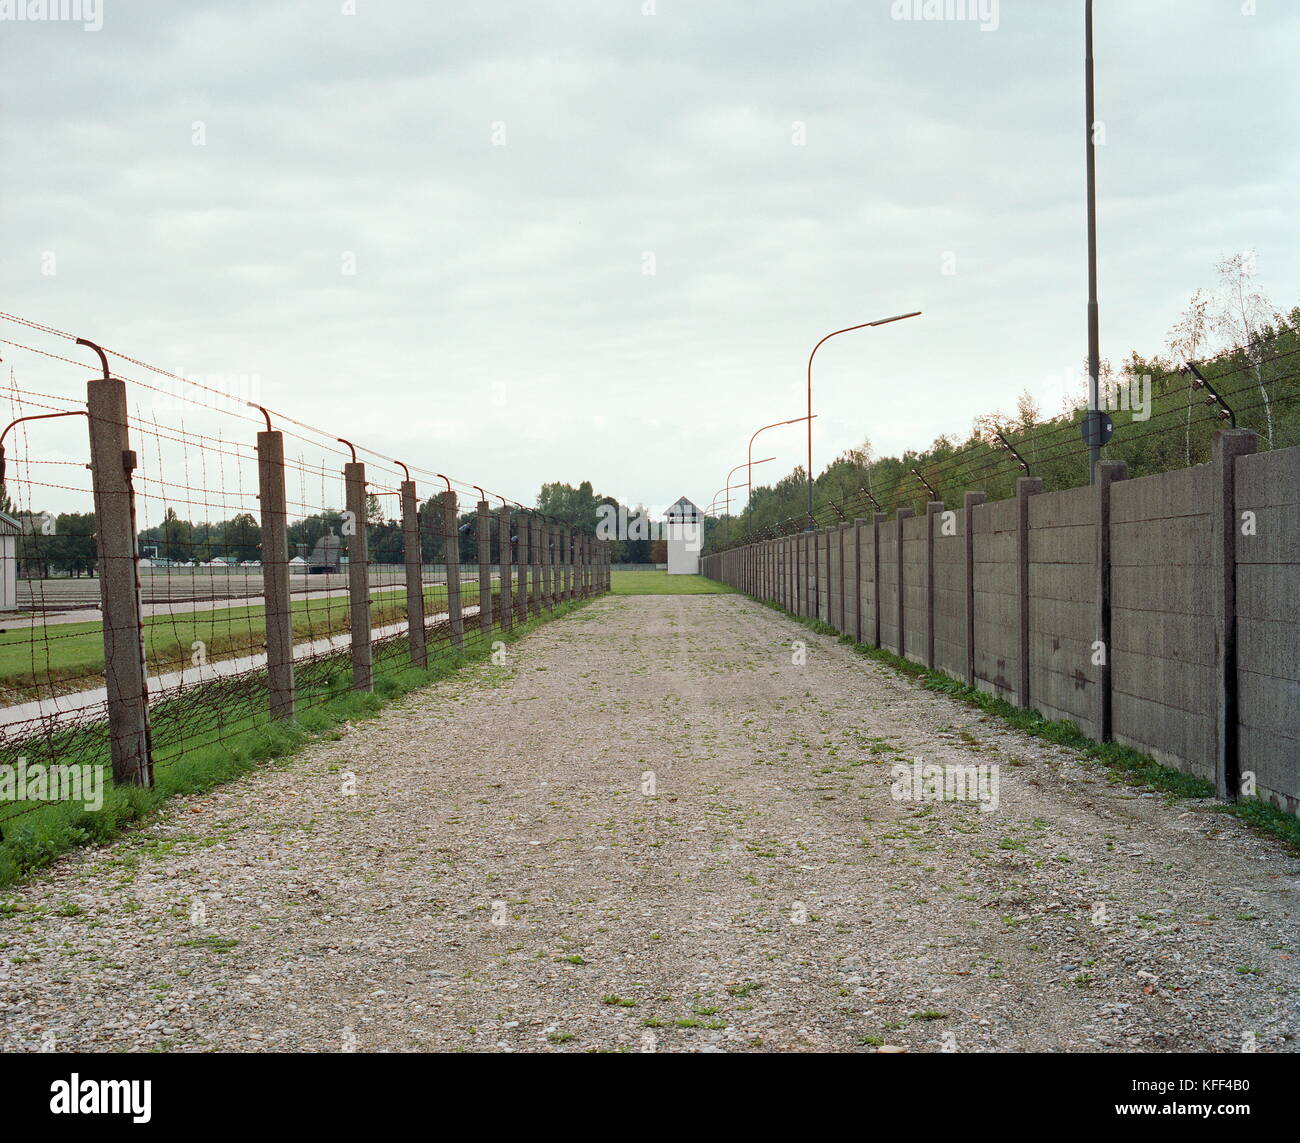 Concentration camp, Dachau, Germany, Stock Photo